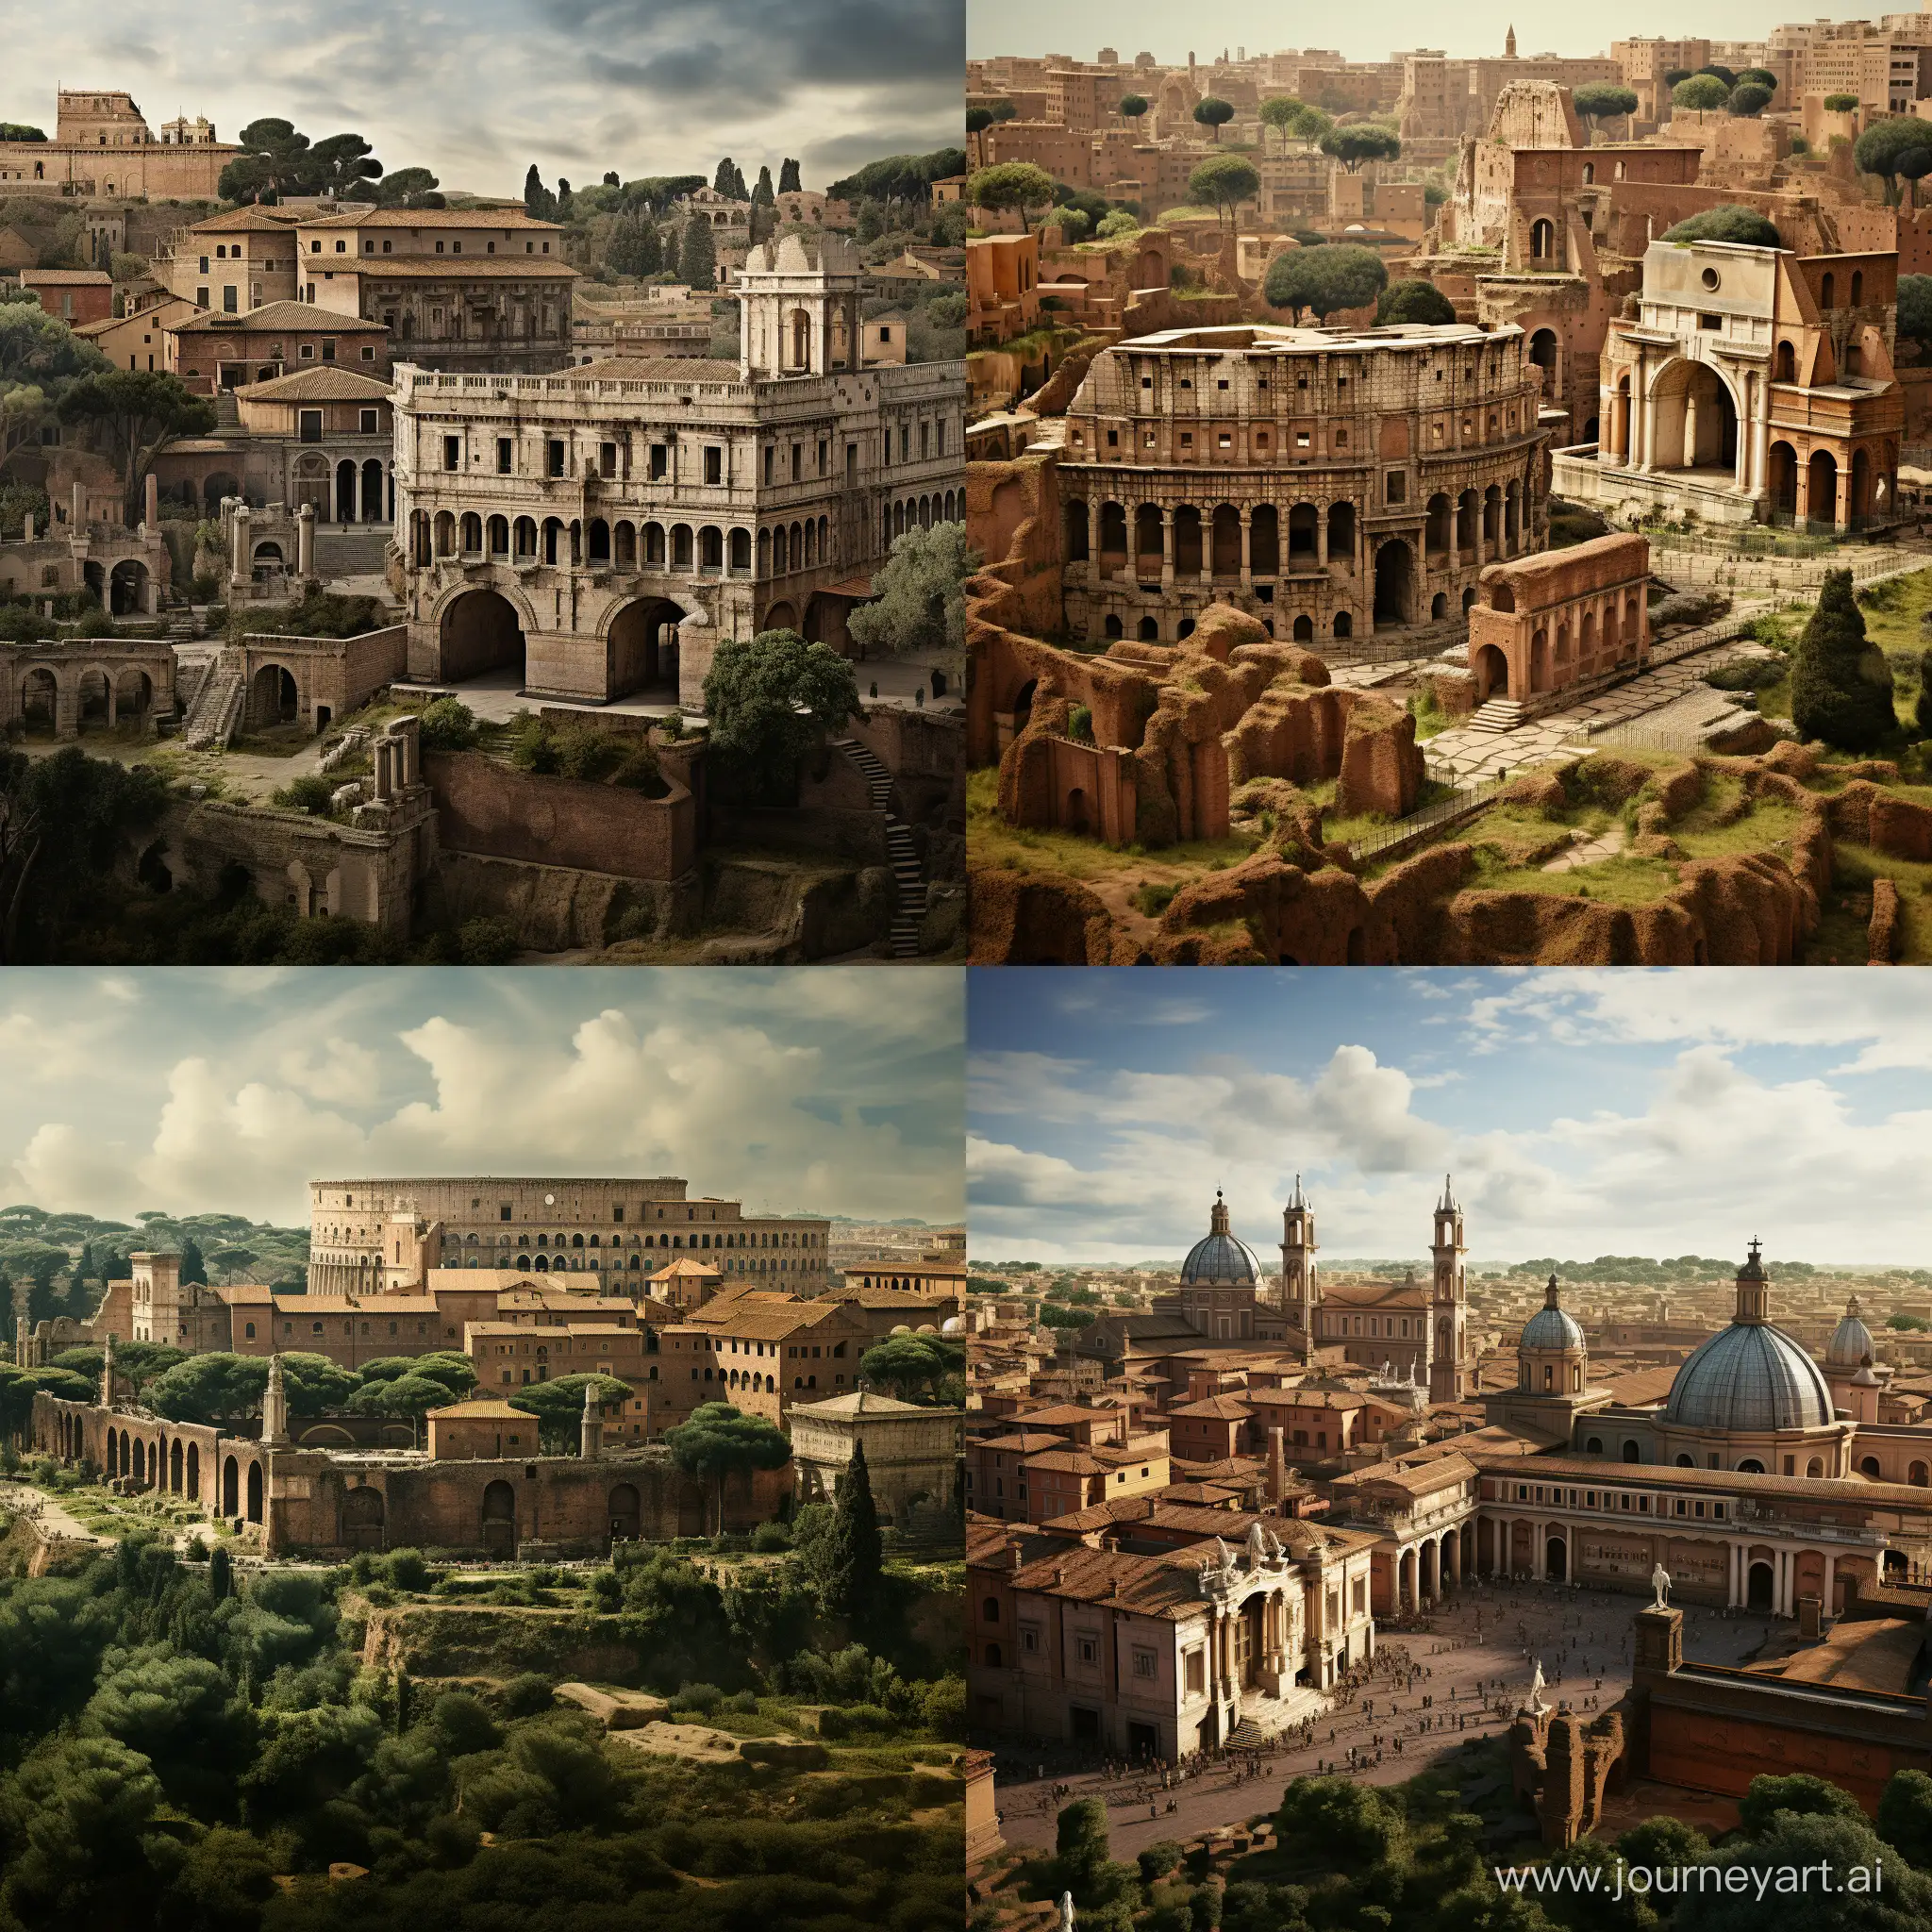 Detailed-Historic-Cityscapes-of-Rome-Italy-Ancient-Roman-Structures-in-Vivid-Imagery